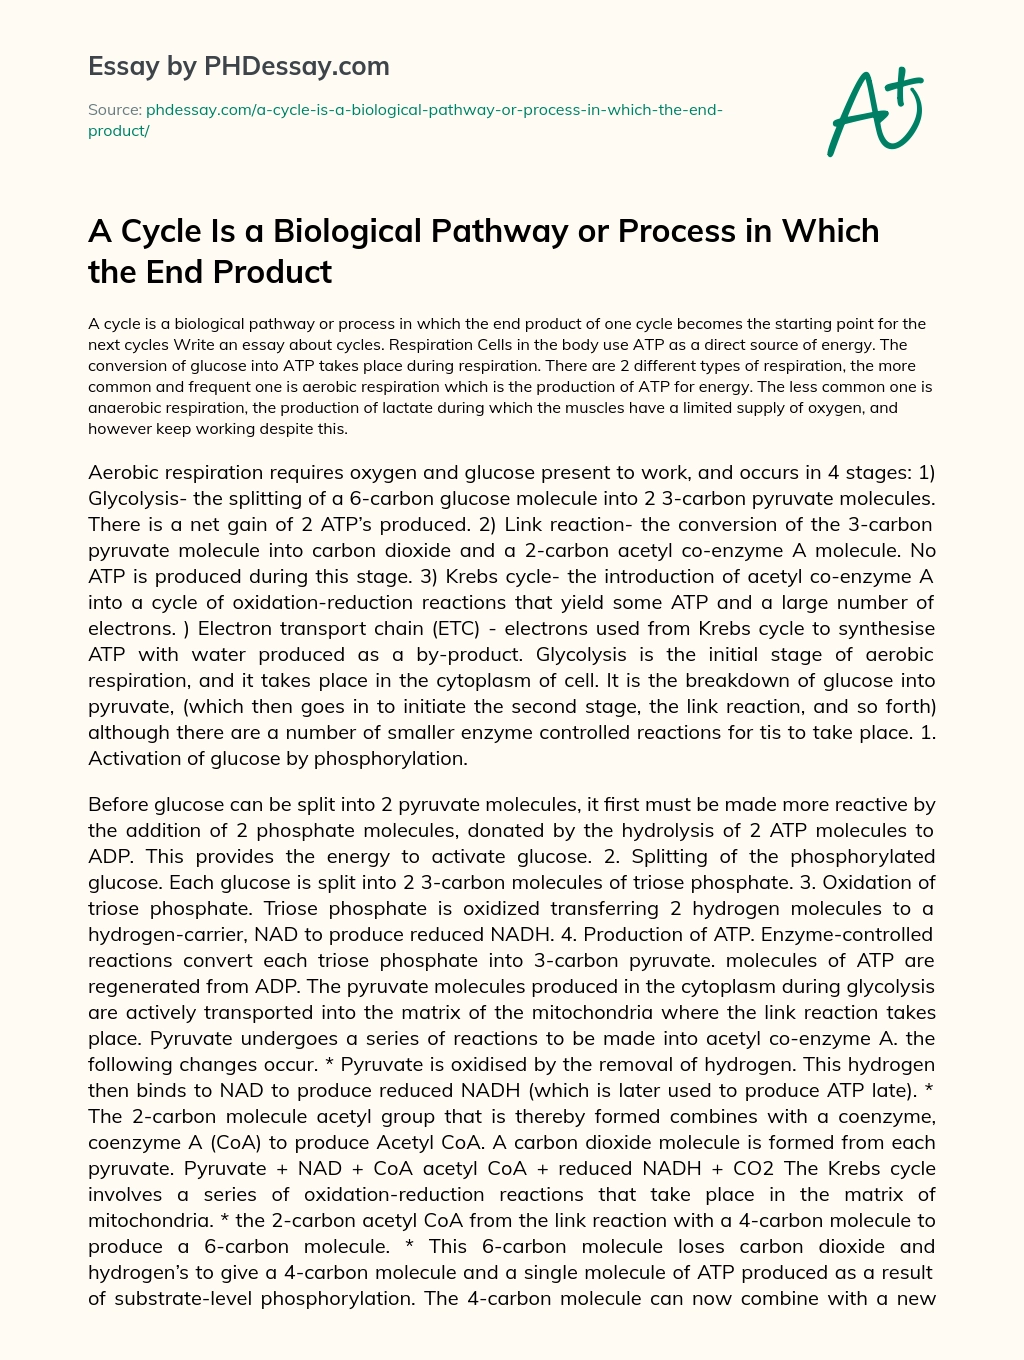 A Cycle Is a Biological Pathway or Process in Which the End Product essay